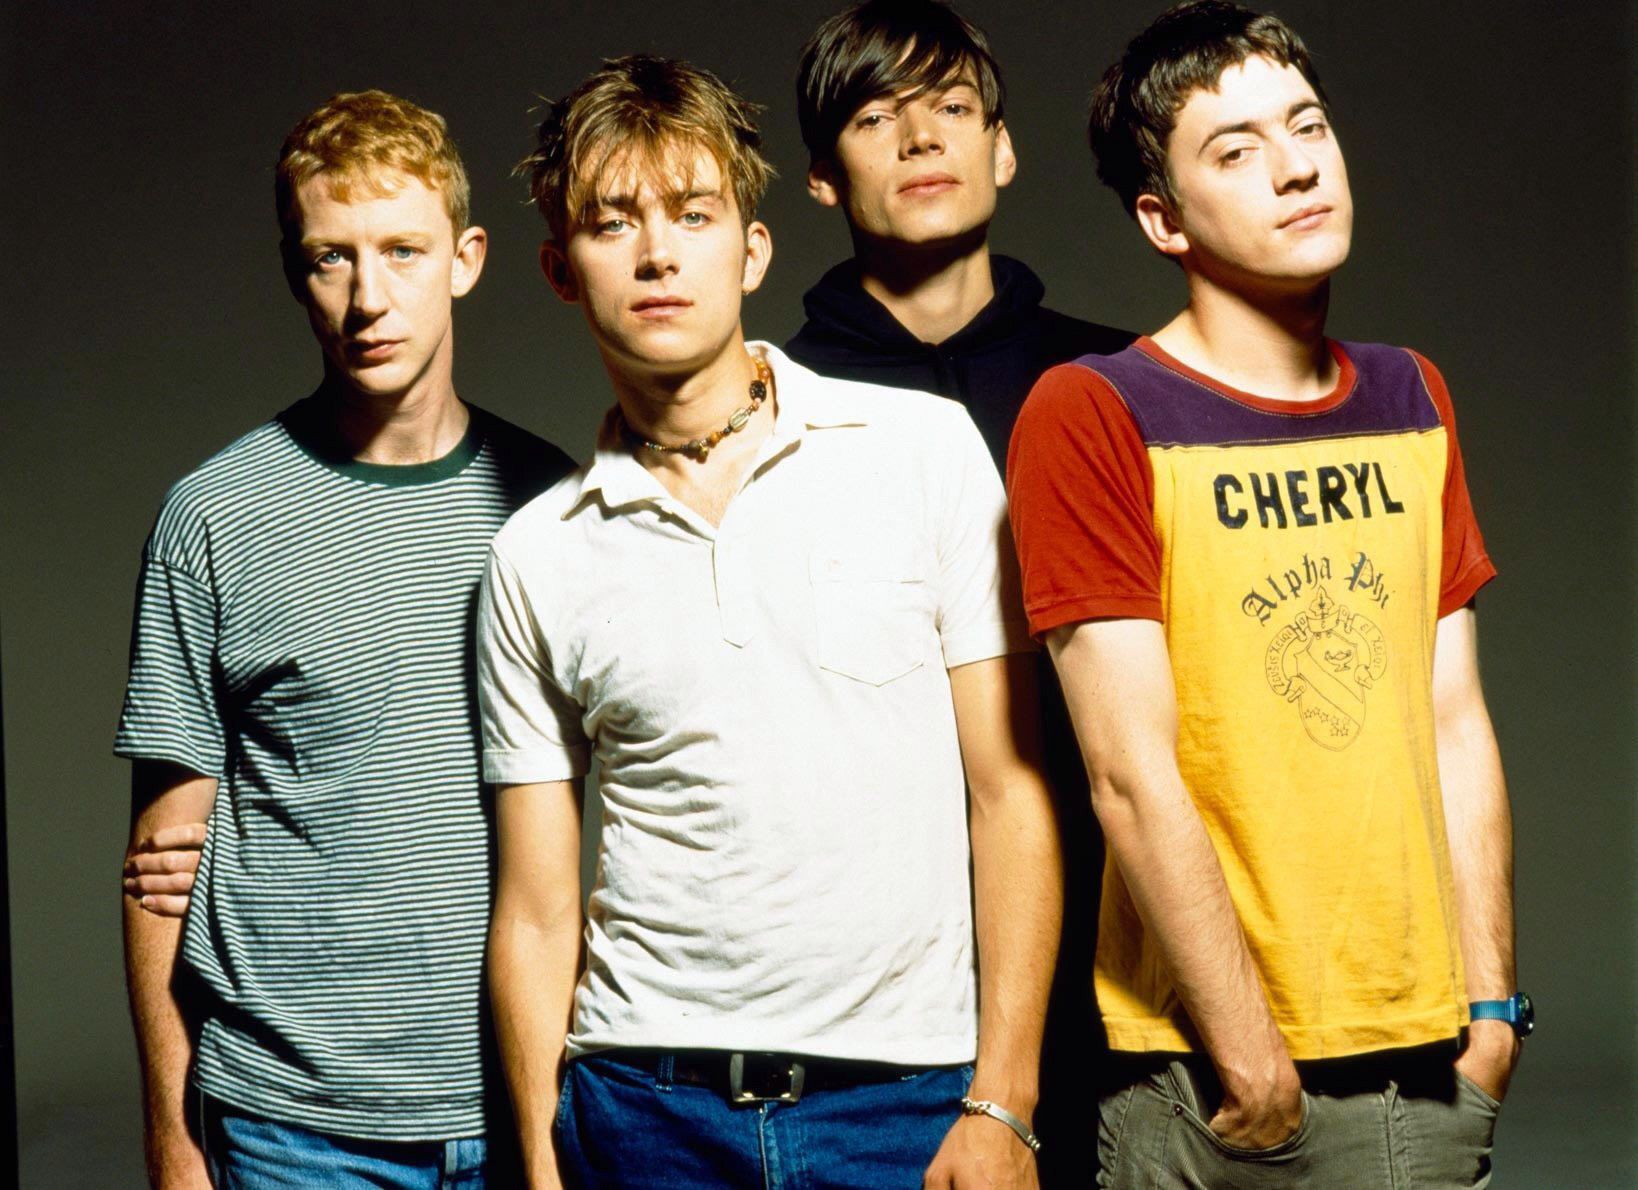 Blur will perform at Roskilde as part of their 35th anniversary celebrations